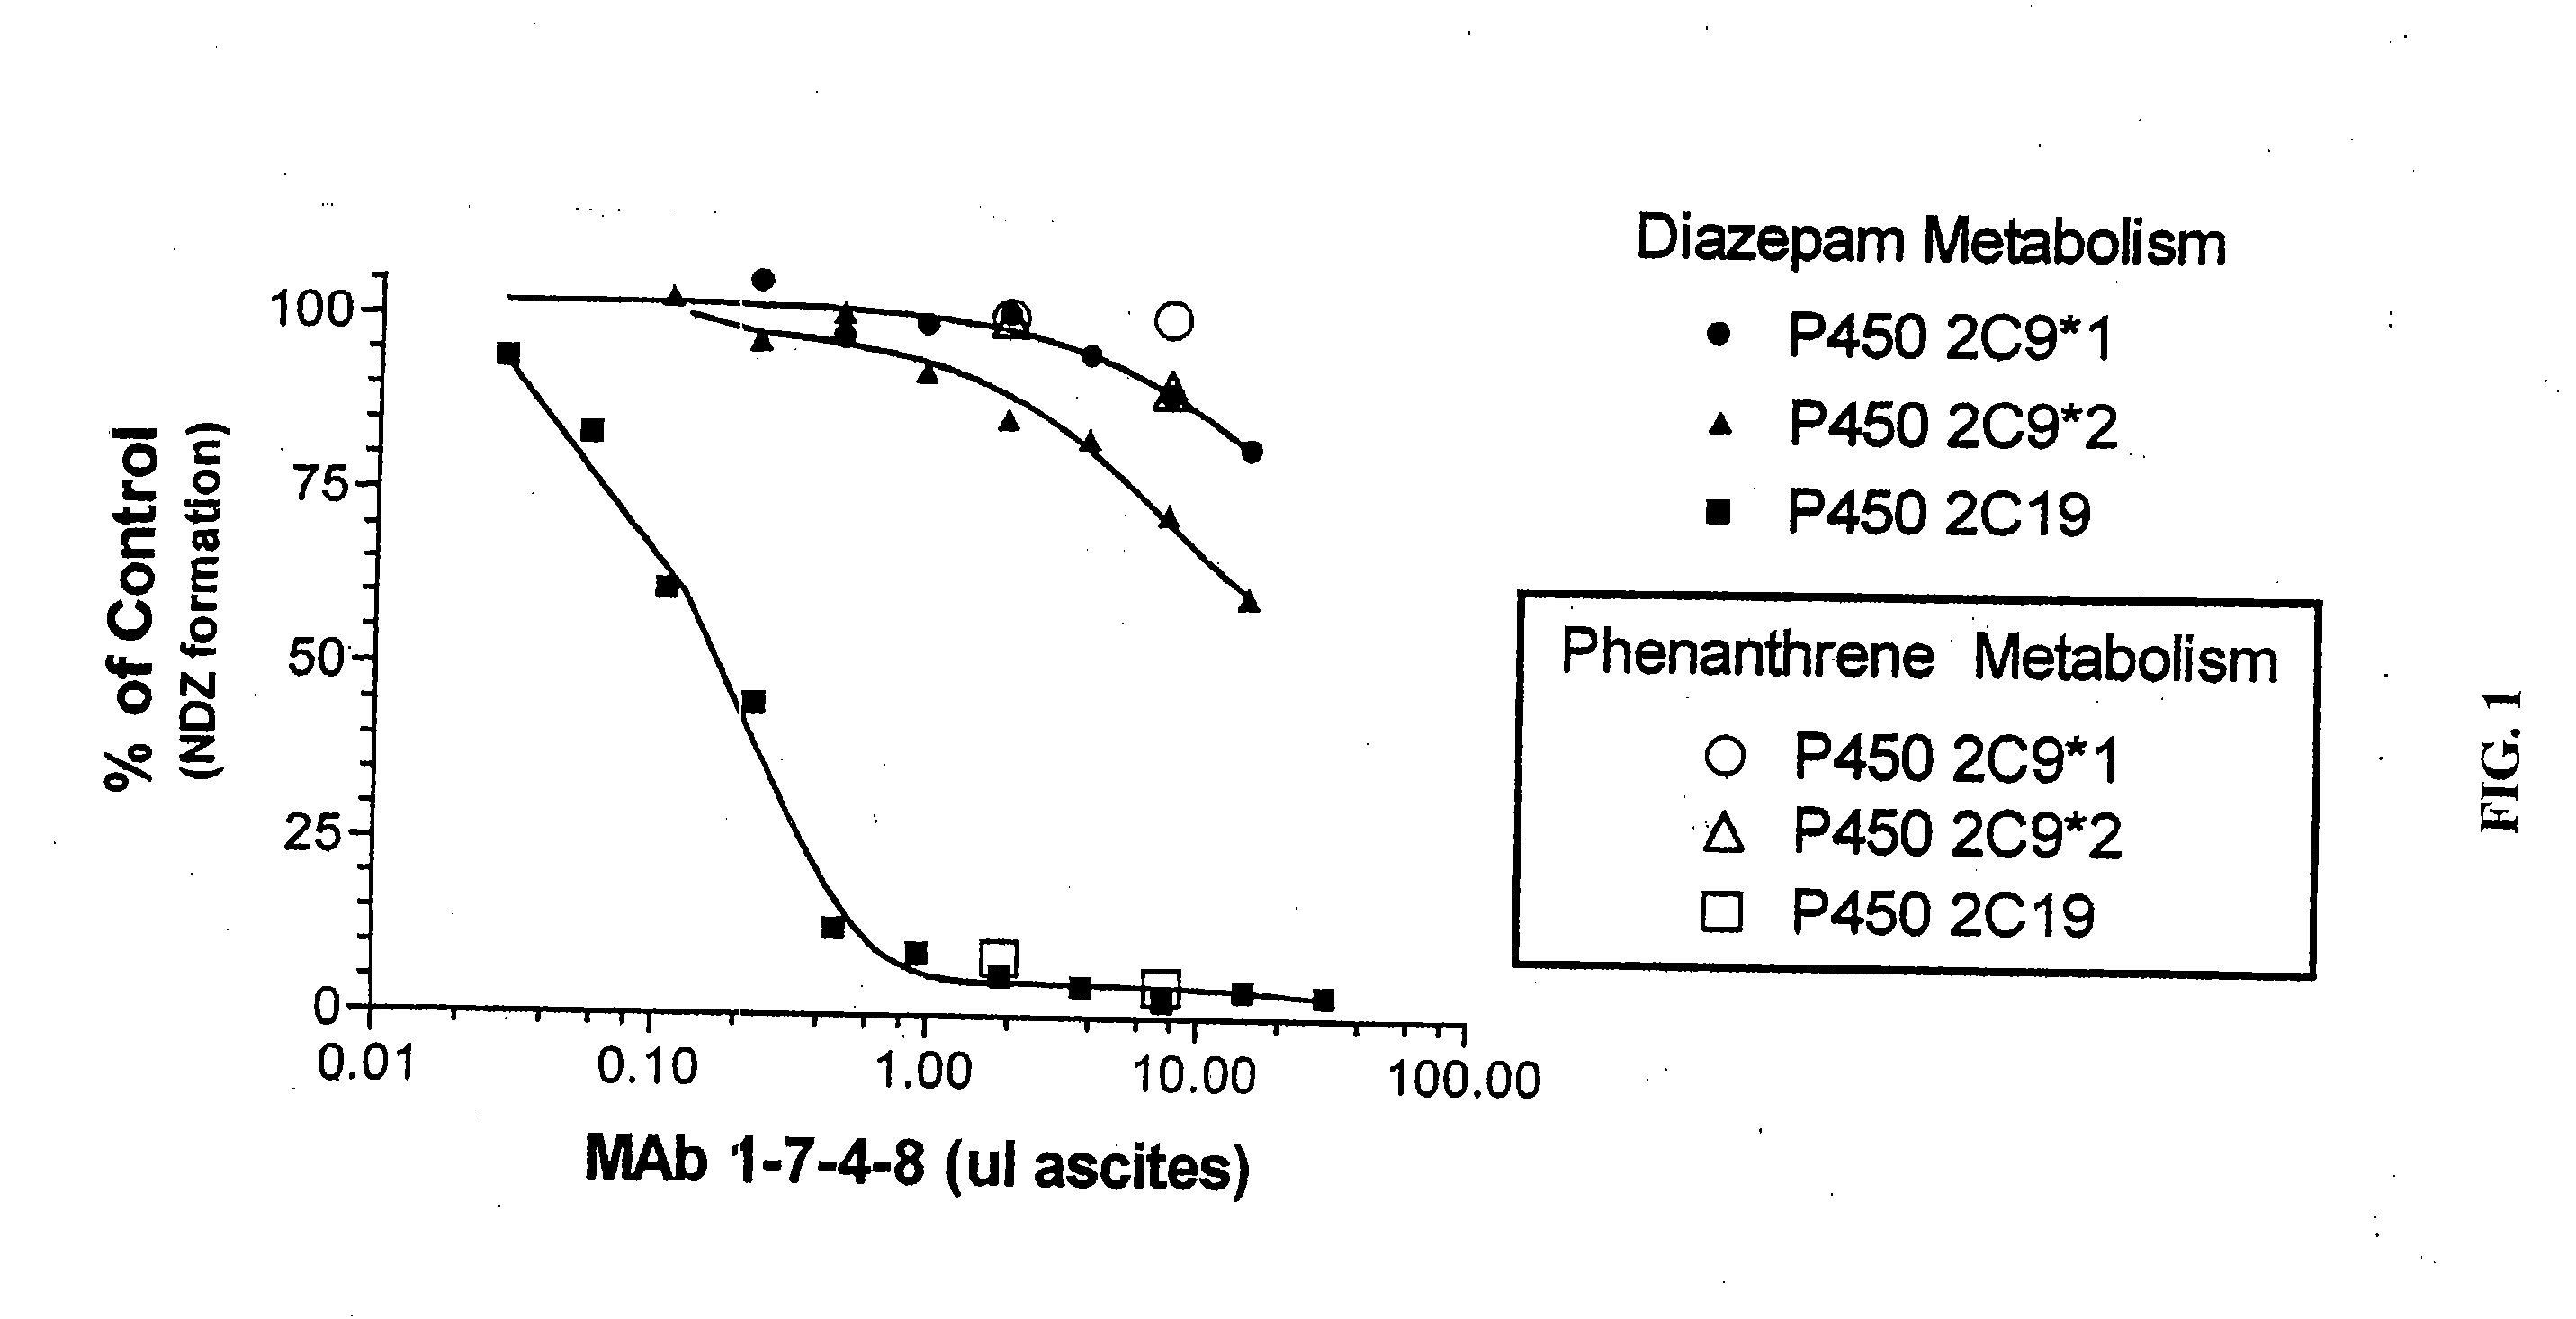 Agents that bind to and inhibit human cytochrome p450 2c19